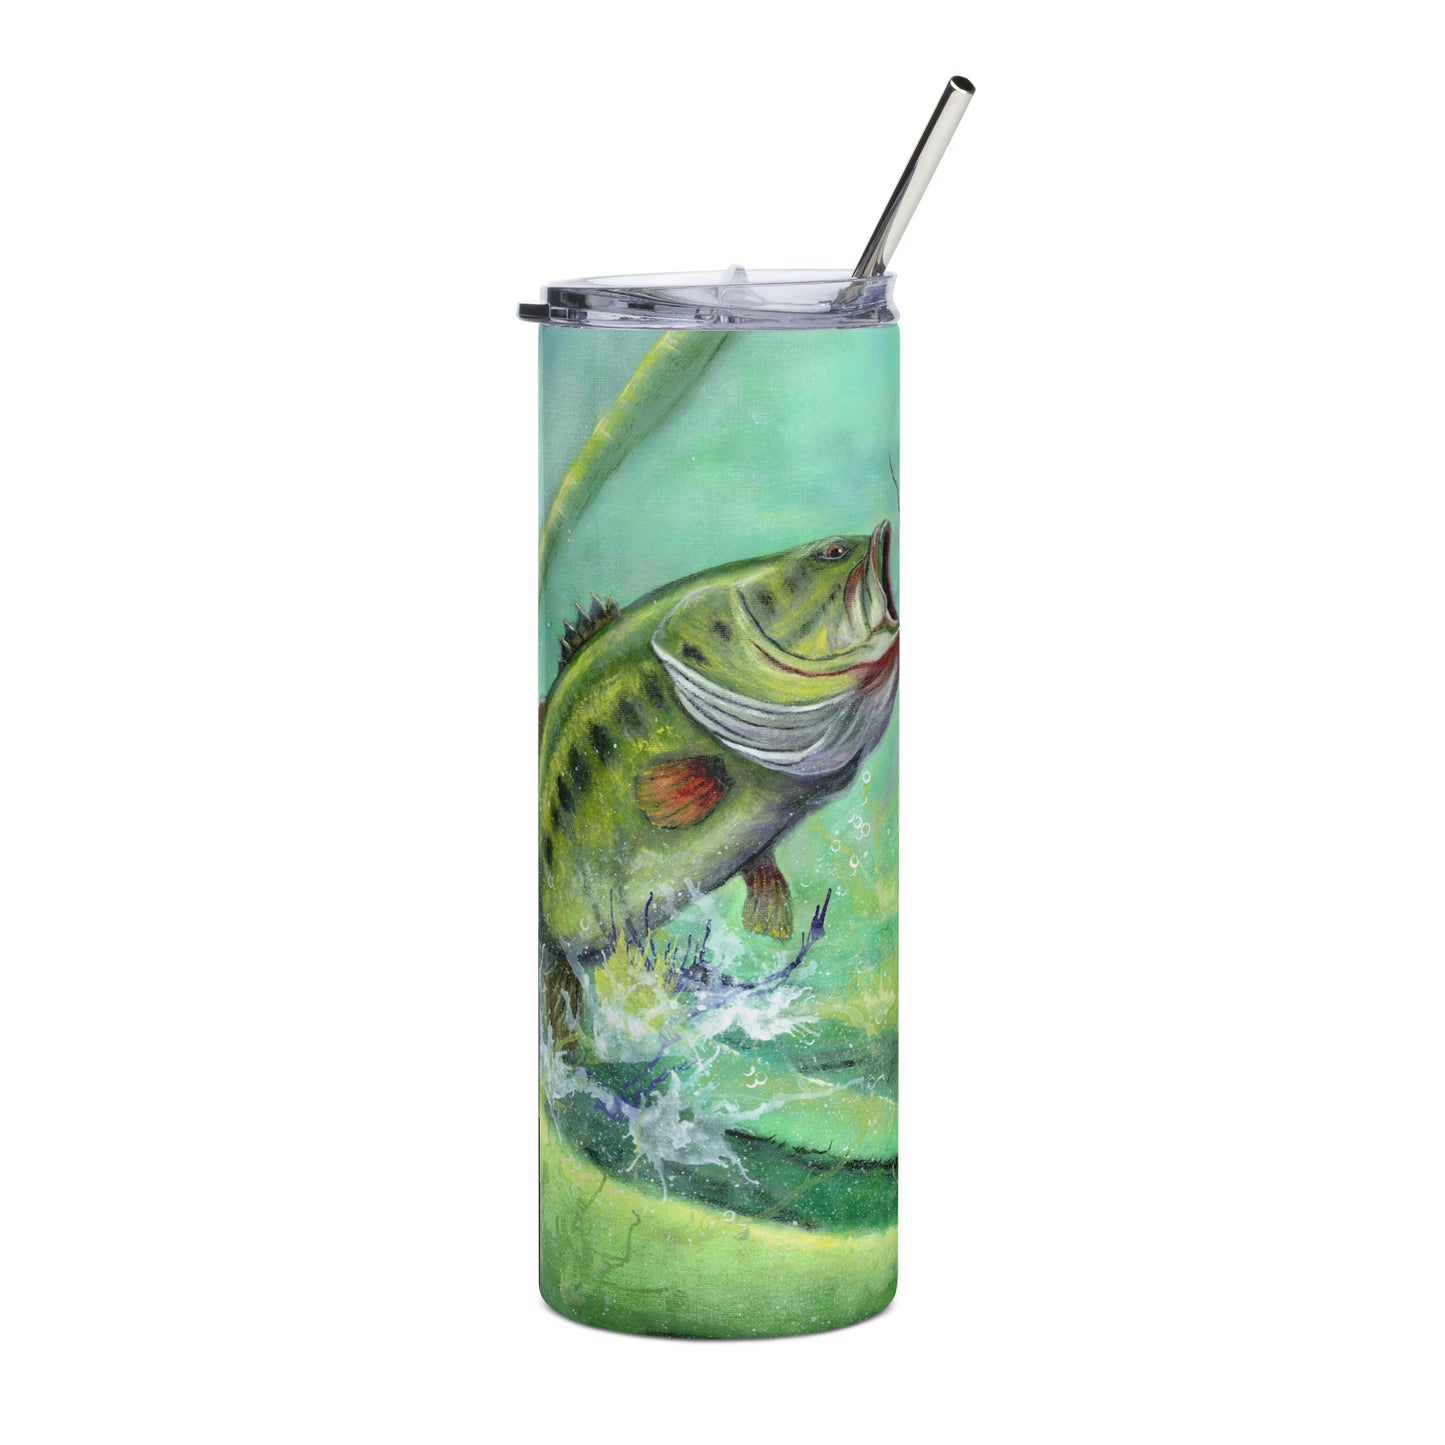 Bass Stainless steel tumbler